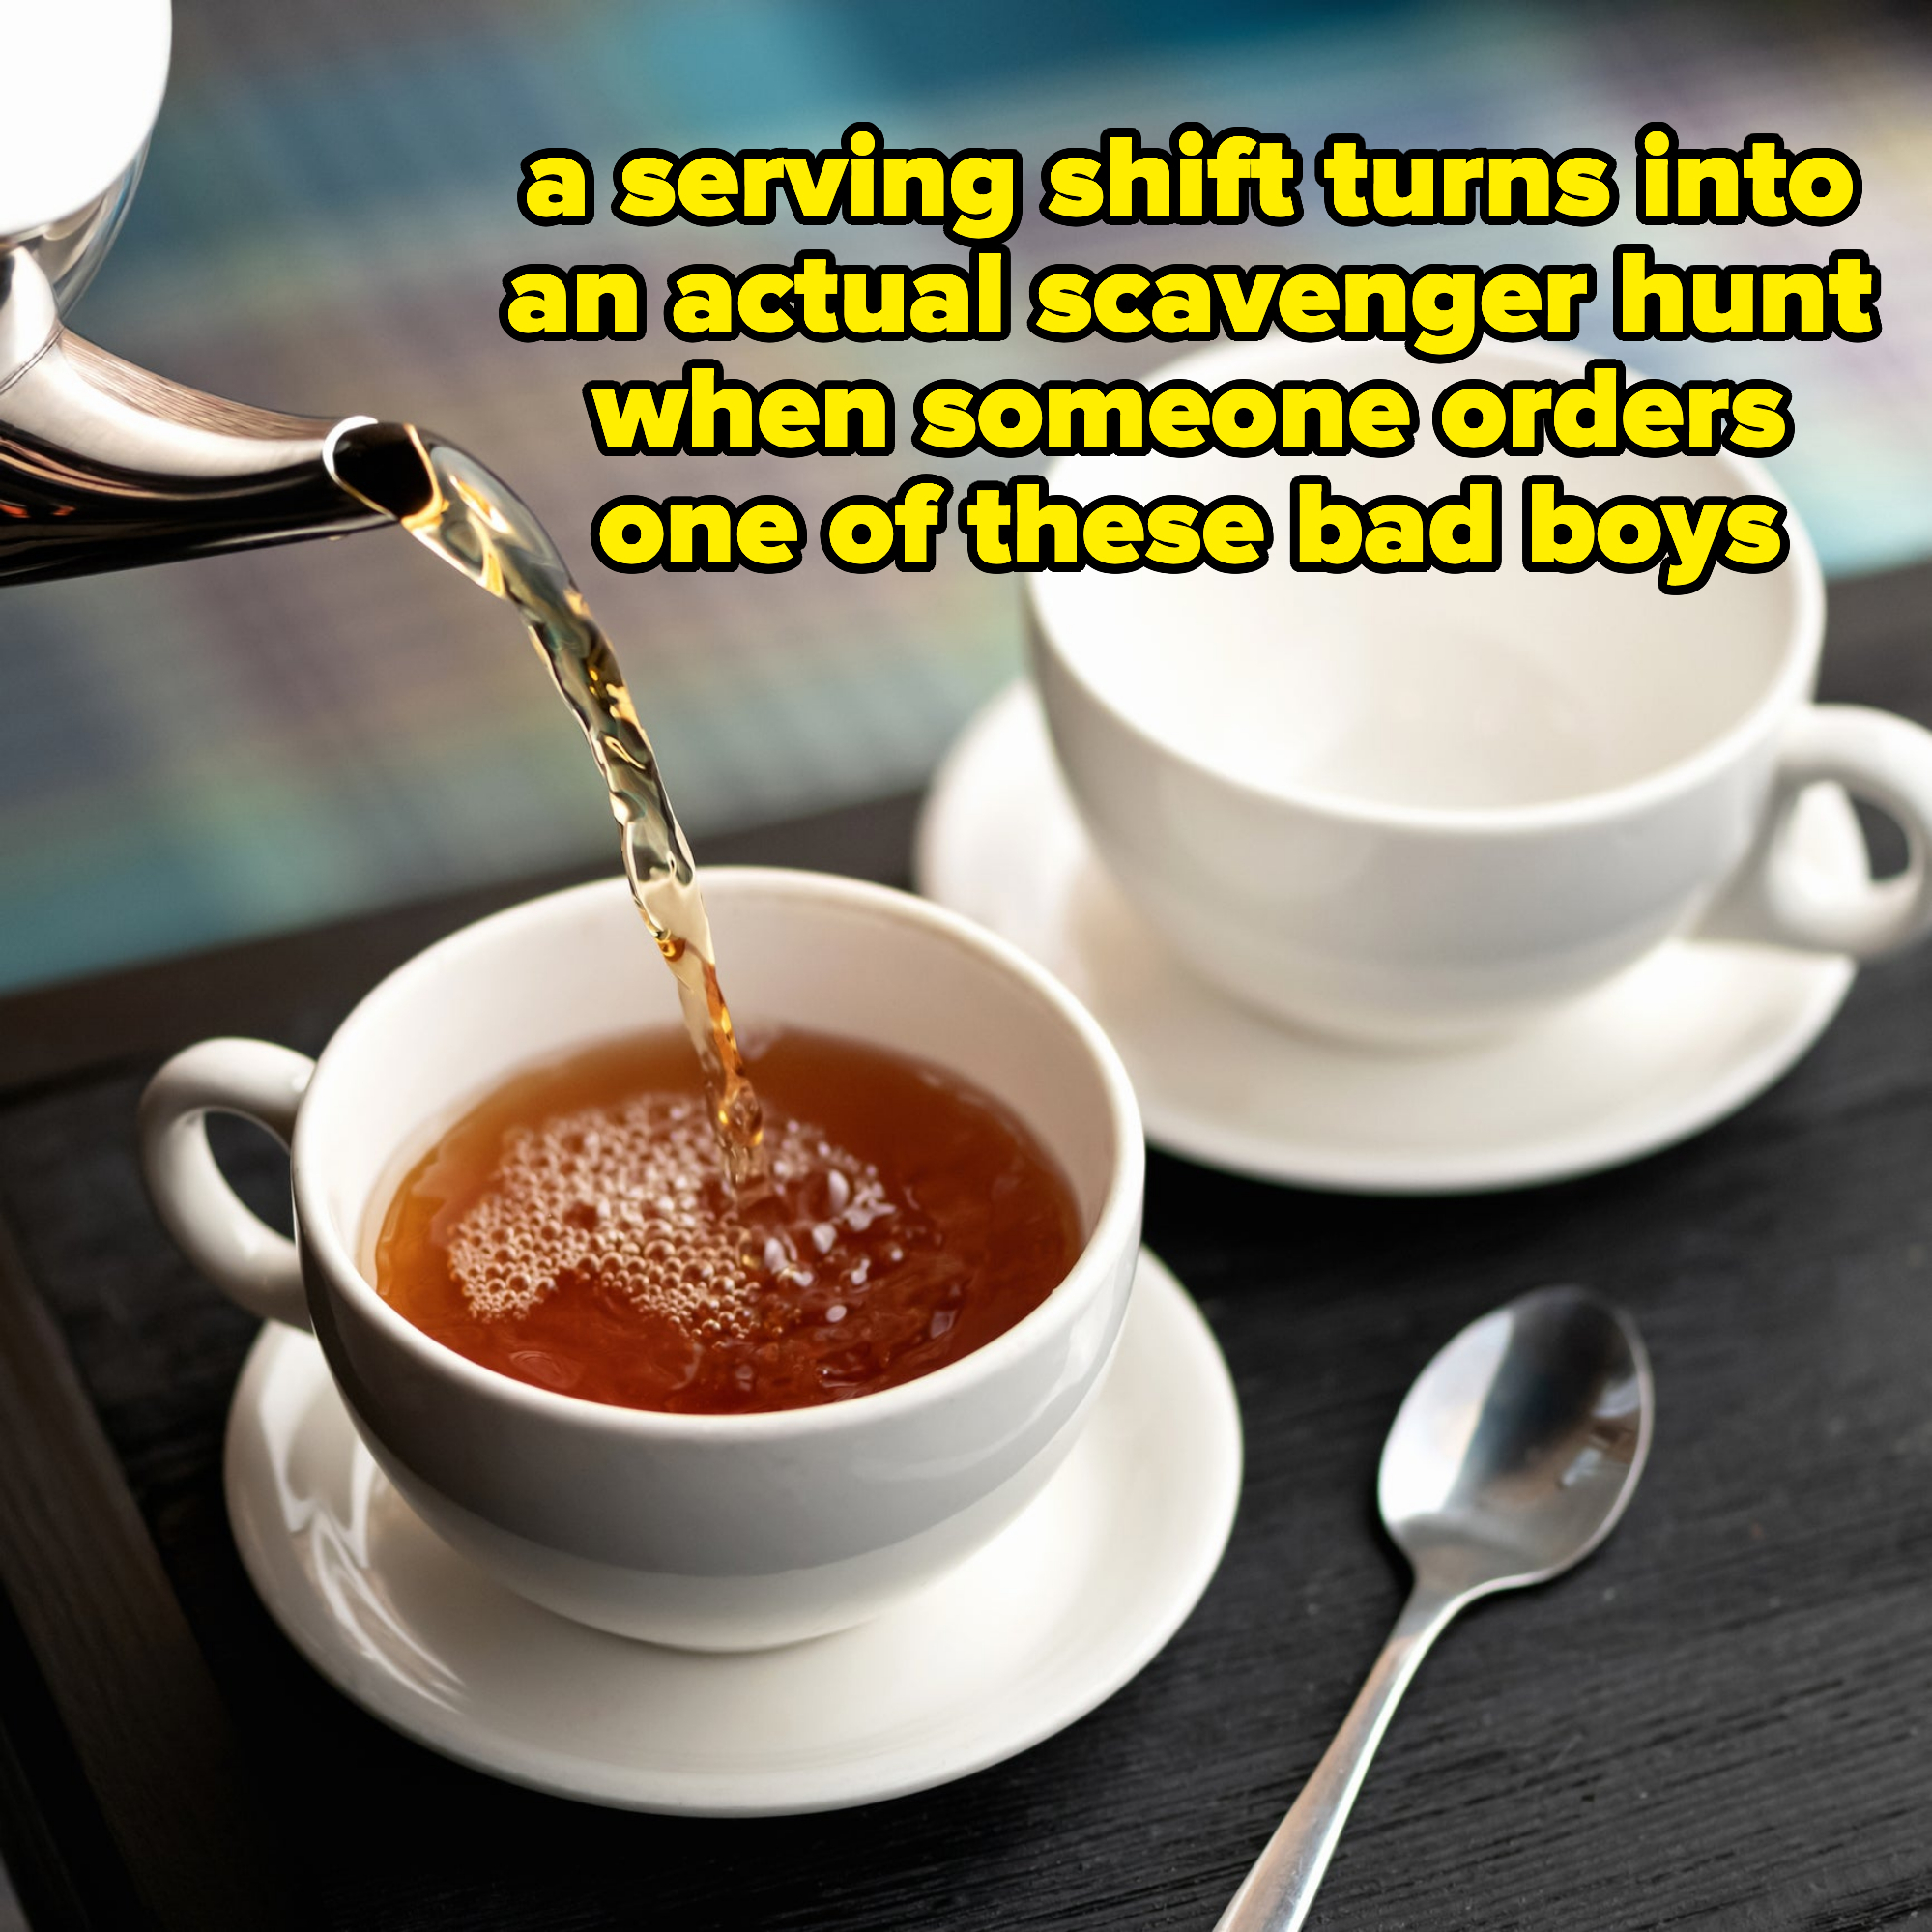 Someone pouring tea in a mug